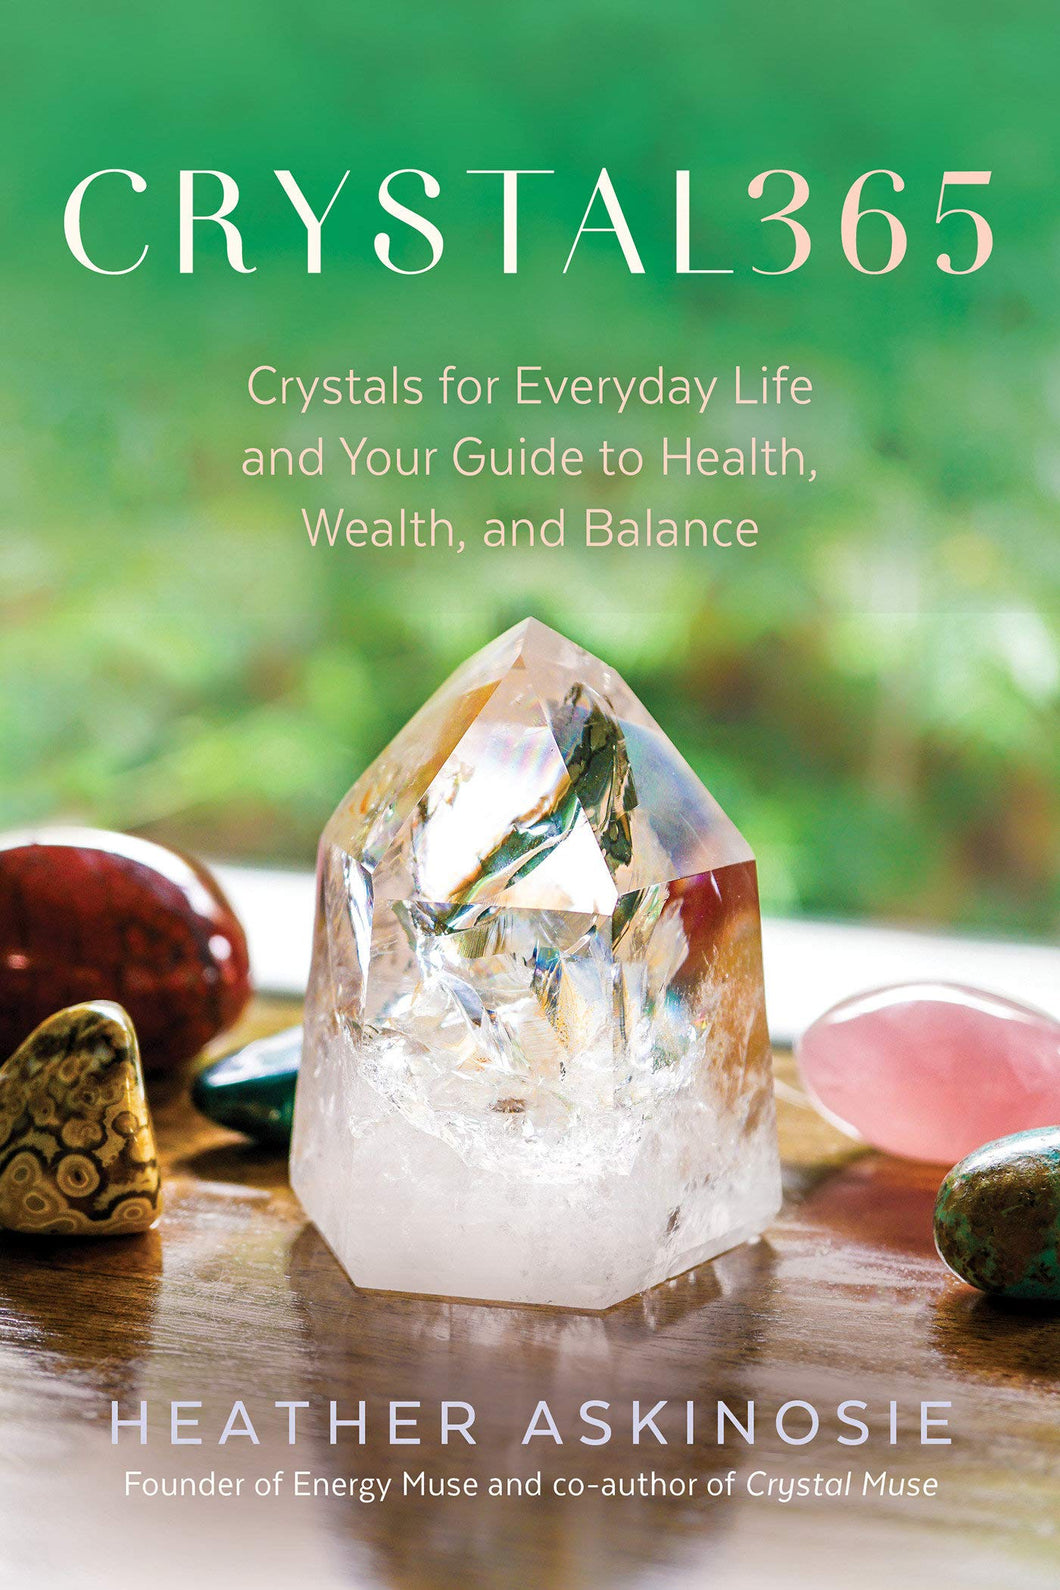 CRYSTAL365: Crystals for Everyday Life and Your Guide to Health, Wealth, and Balance